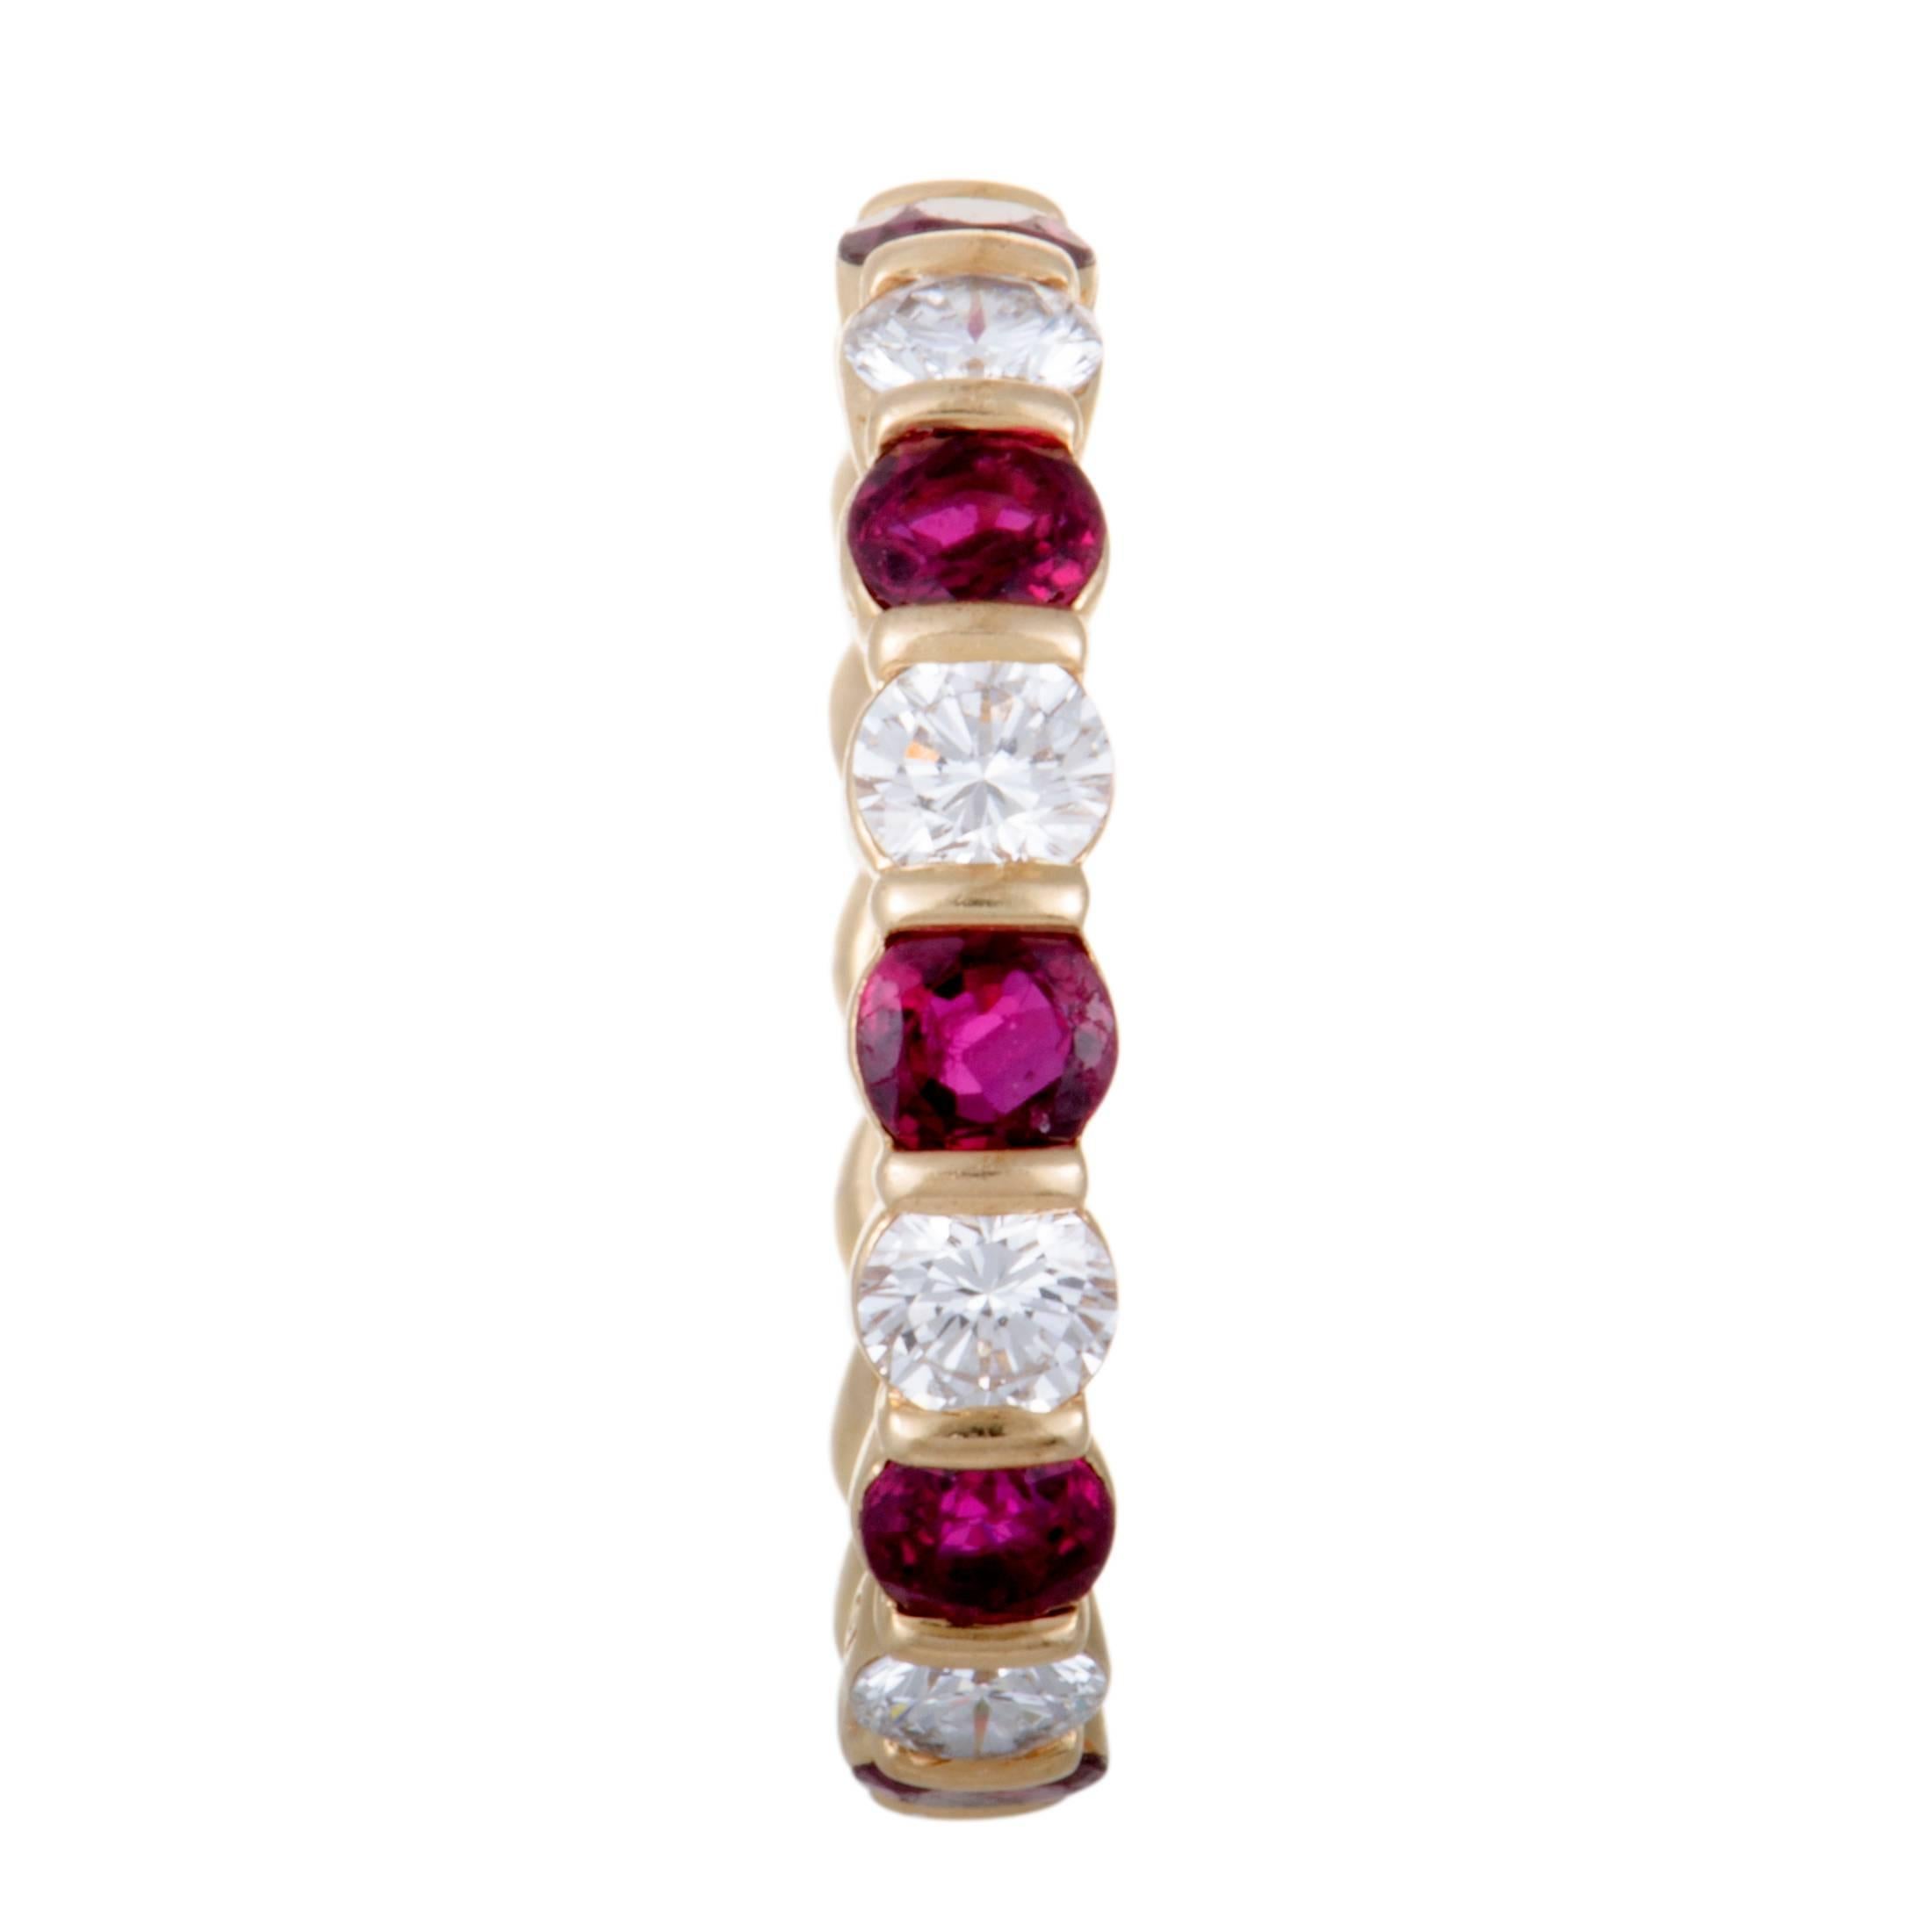 Women's Van Cleef & Arpels Diamond and Ruby Yellow Gold Eternity Band Ring